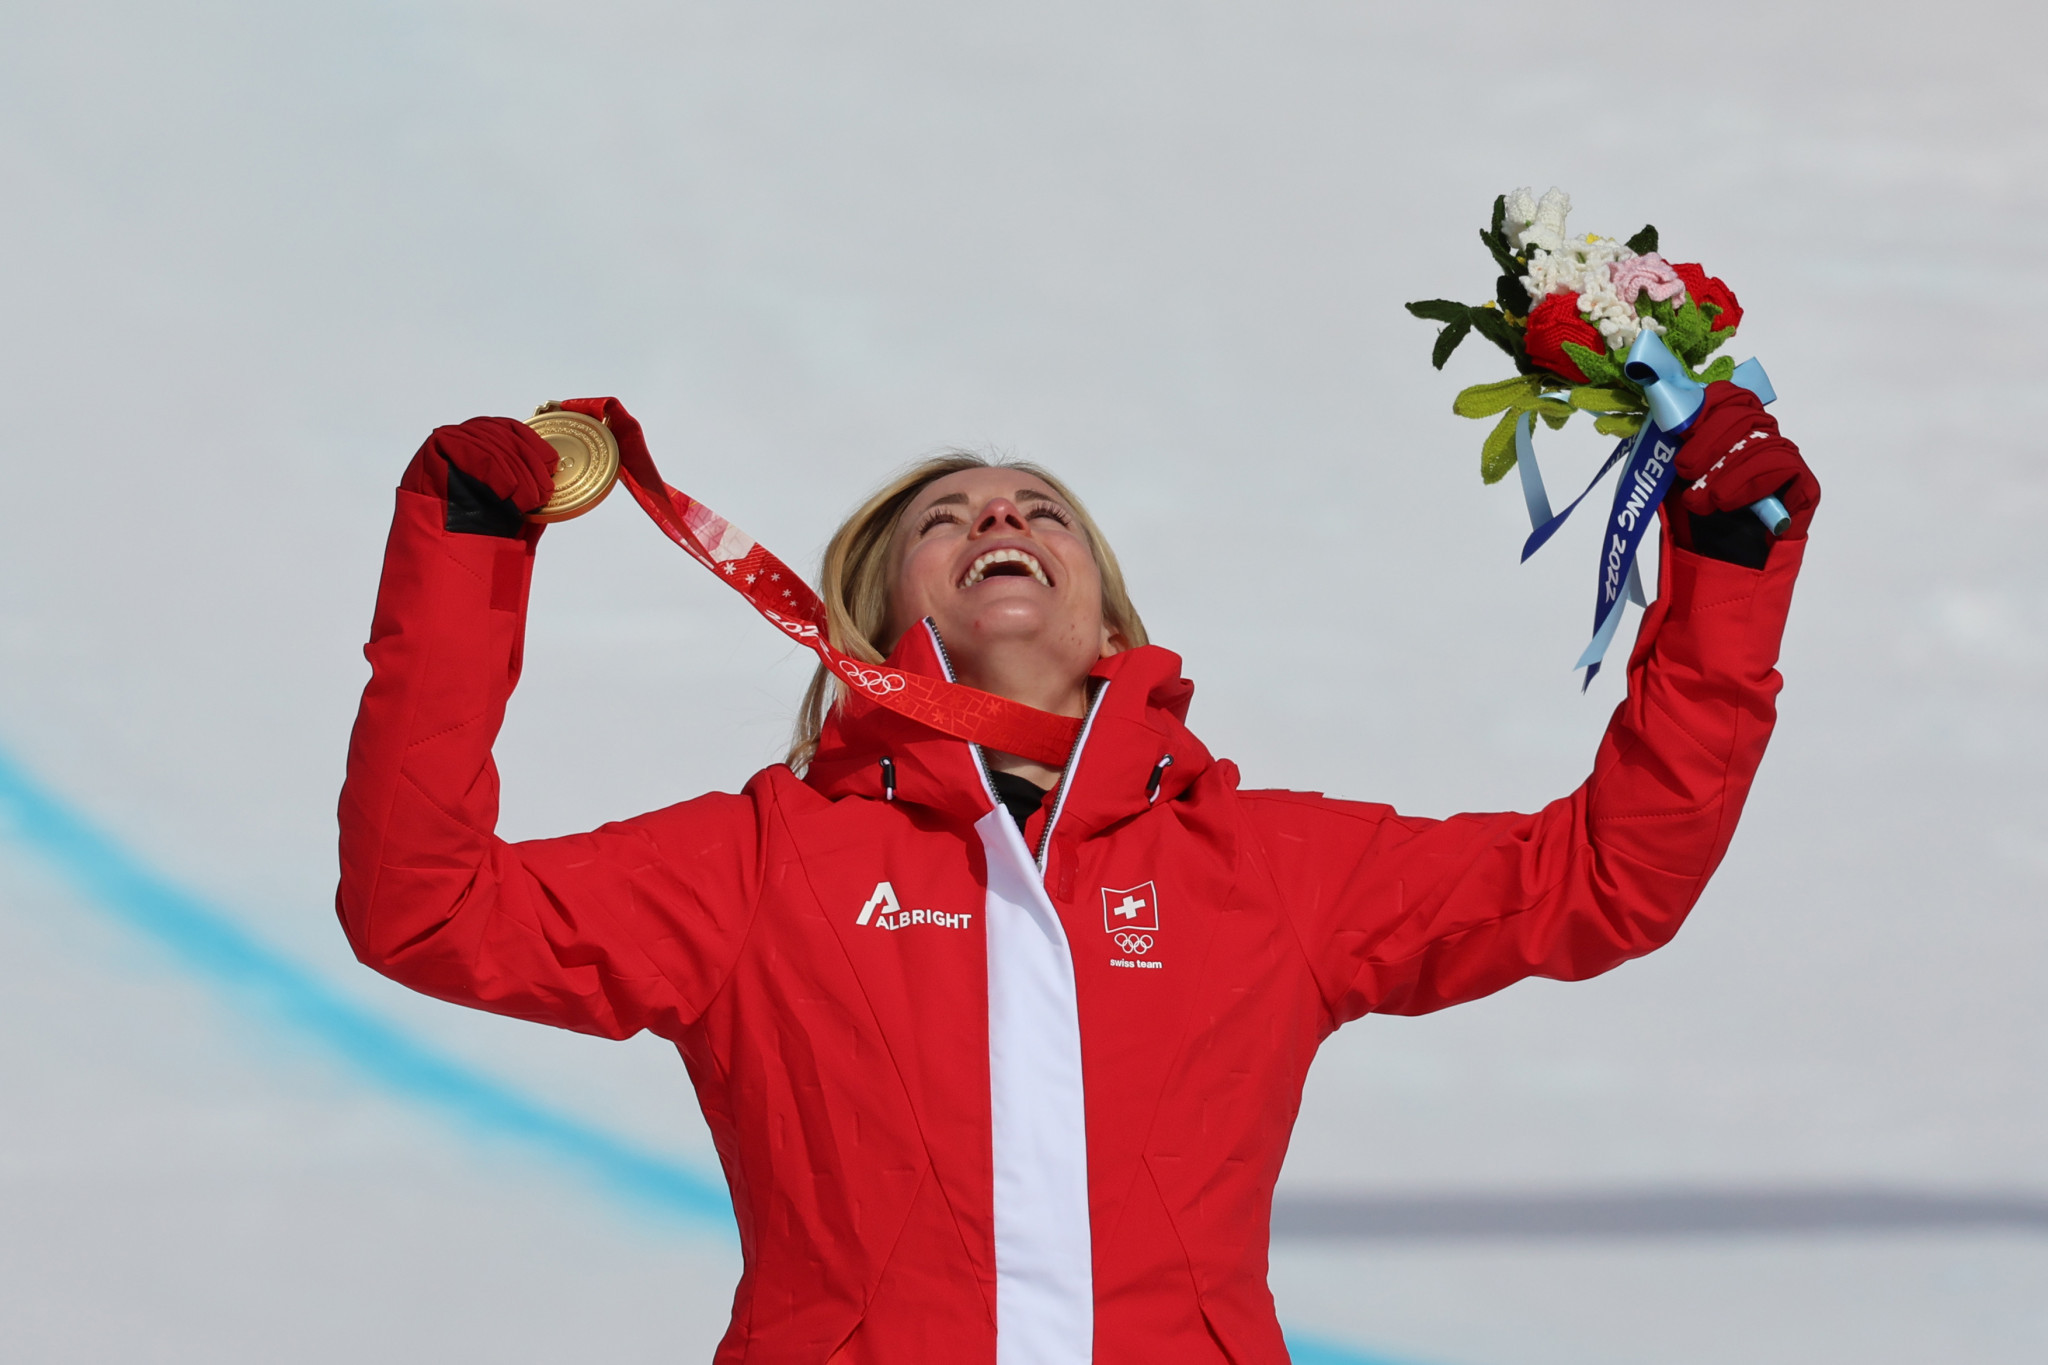 Lara Gut-Behrami won Olympic Super G gold earlier this year ©Getty Images